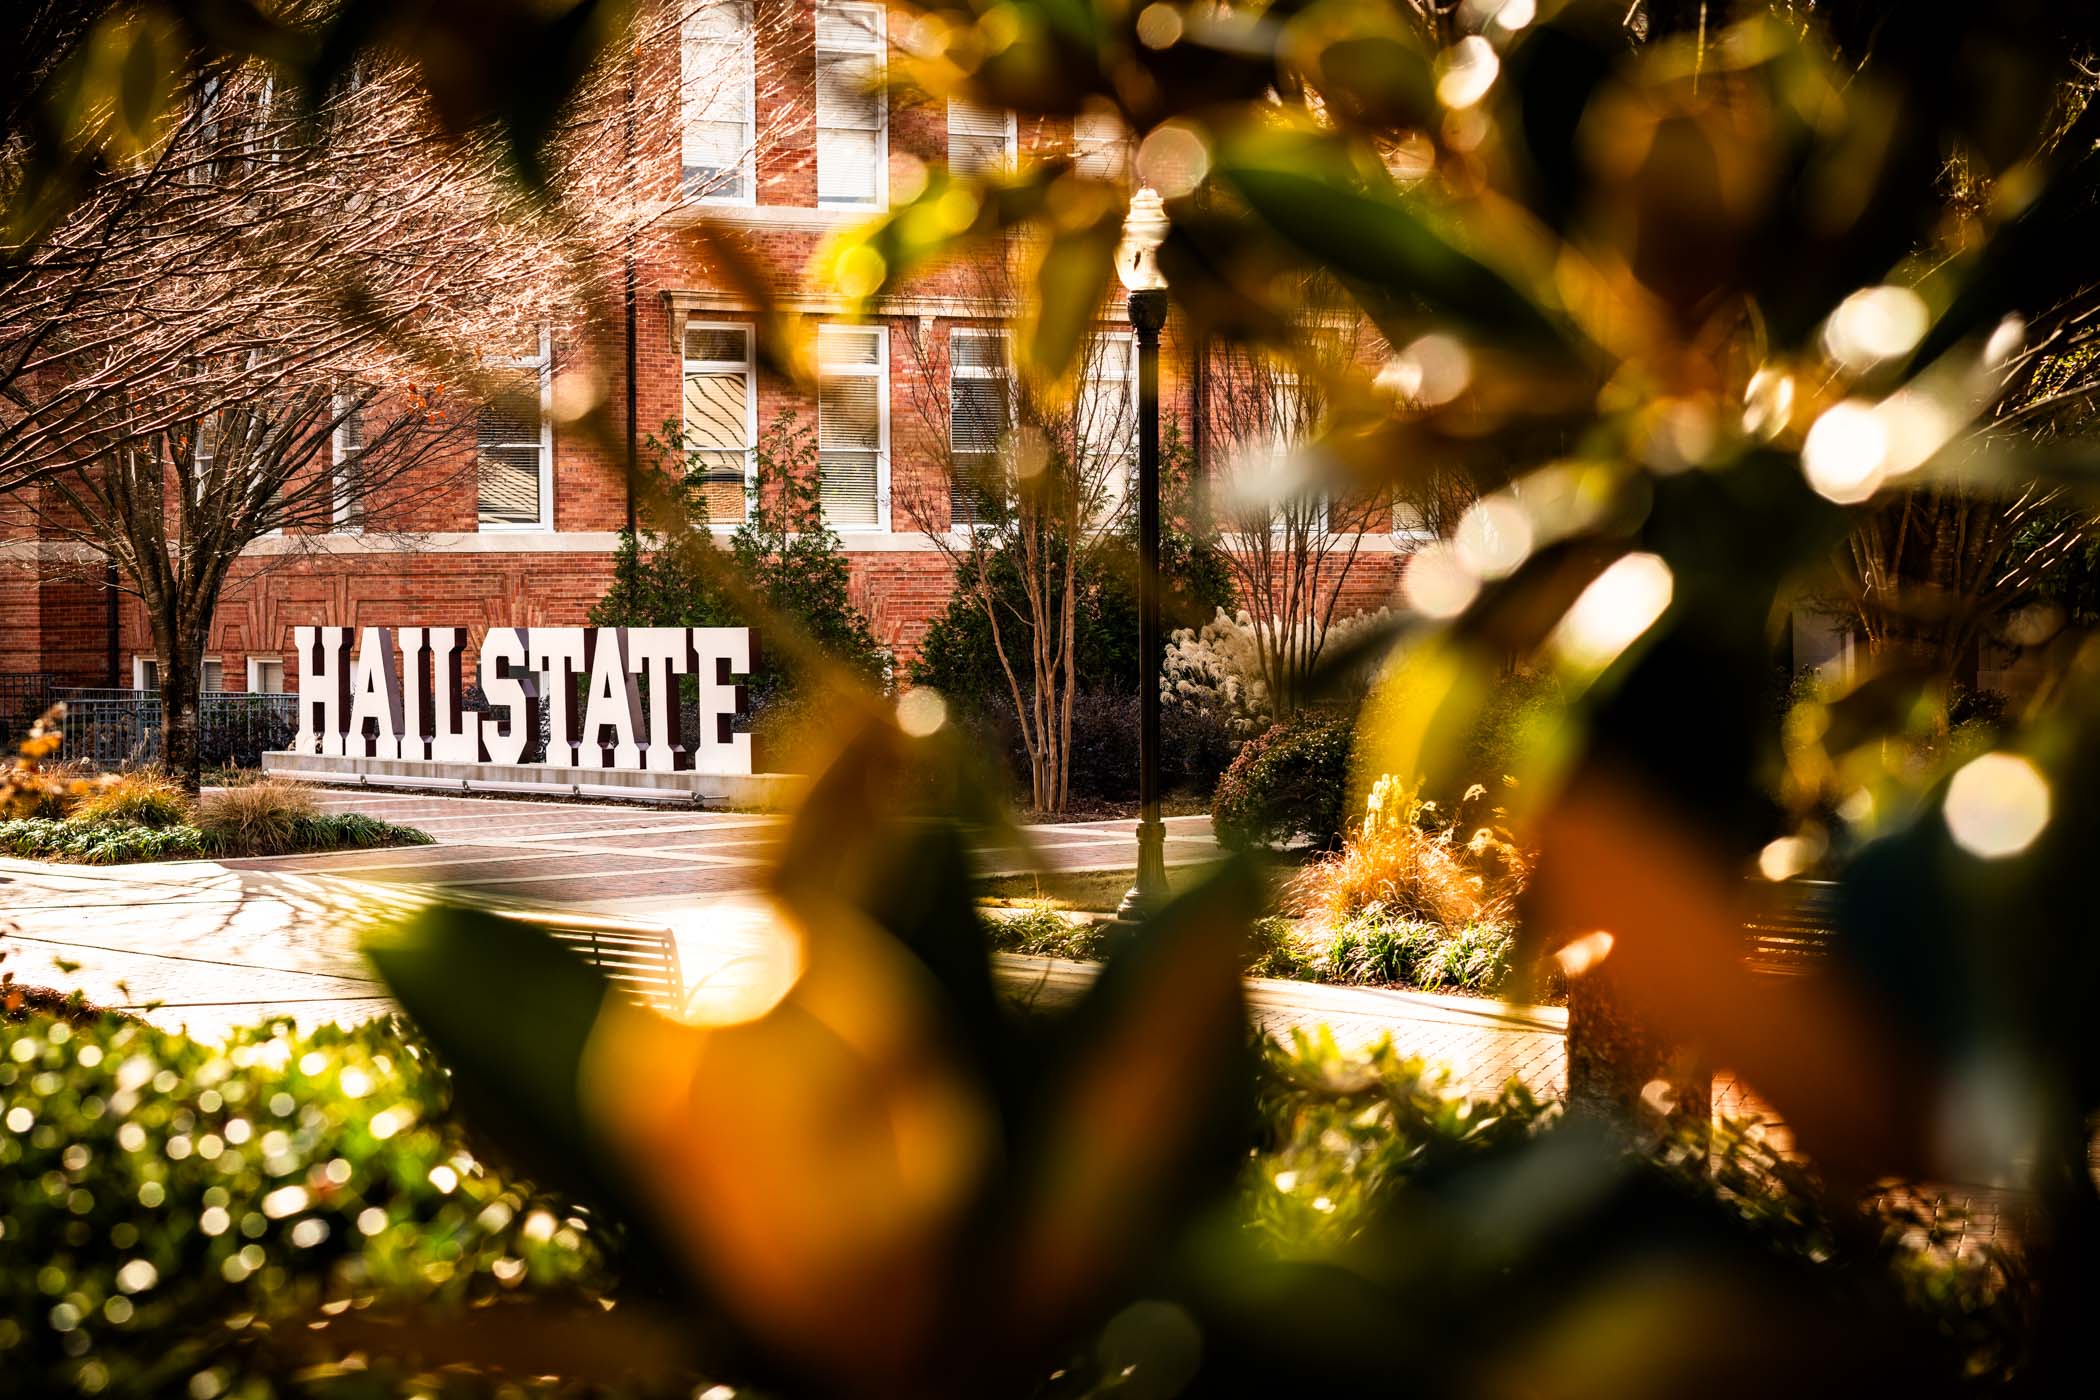 While peeking through a magnolia tree, MSU&#039;s iconic &quot;Hail State&quot; sign is seen bathed in golden winter light along the edges of Hail State Plaza. 